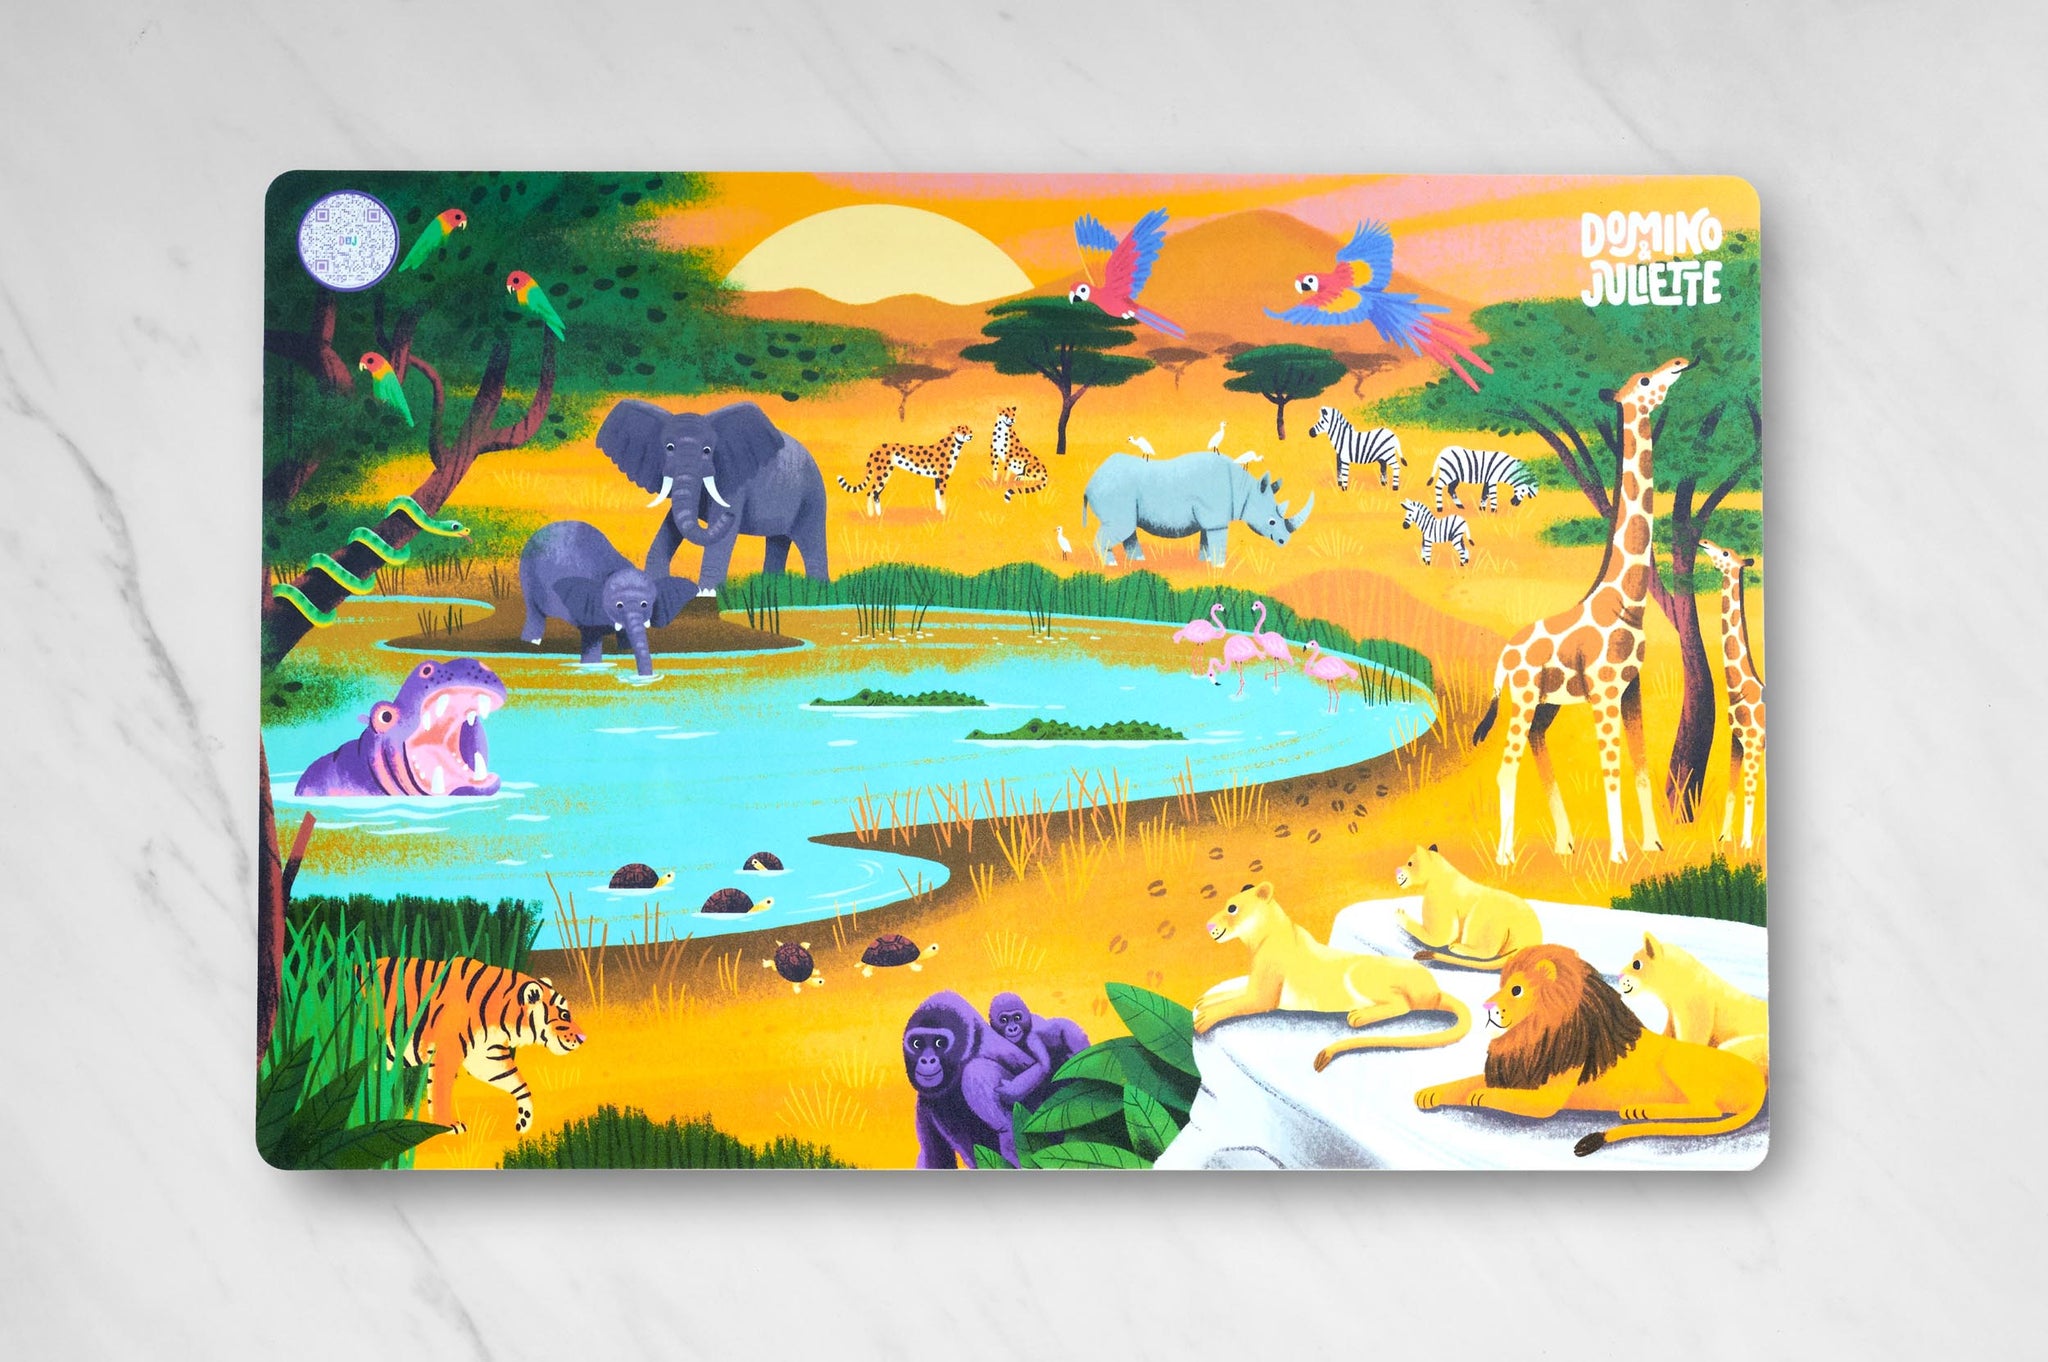 Safari placemat with playful illustrations for language development and early math skills, Safari Placemats, Scenic Safari placemat, Make mealtime fun and educational with this safari-themed placemat, Encourage imaginative play with this colorful Safari placemat, Scenic Safari placemat with simple learning prompts for cognitive development, Fun and educational activities to keep children entertained and engaged on the Safari placemat